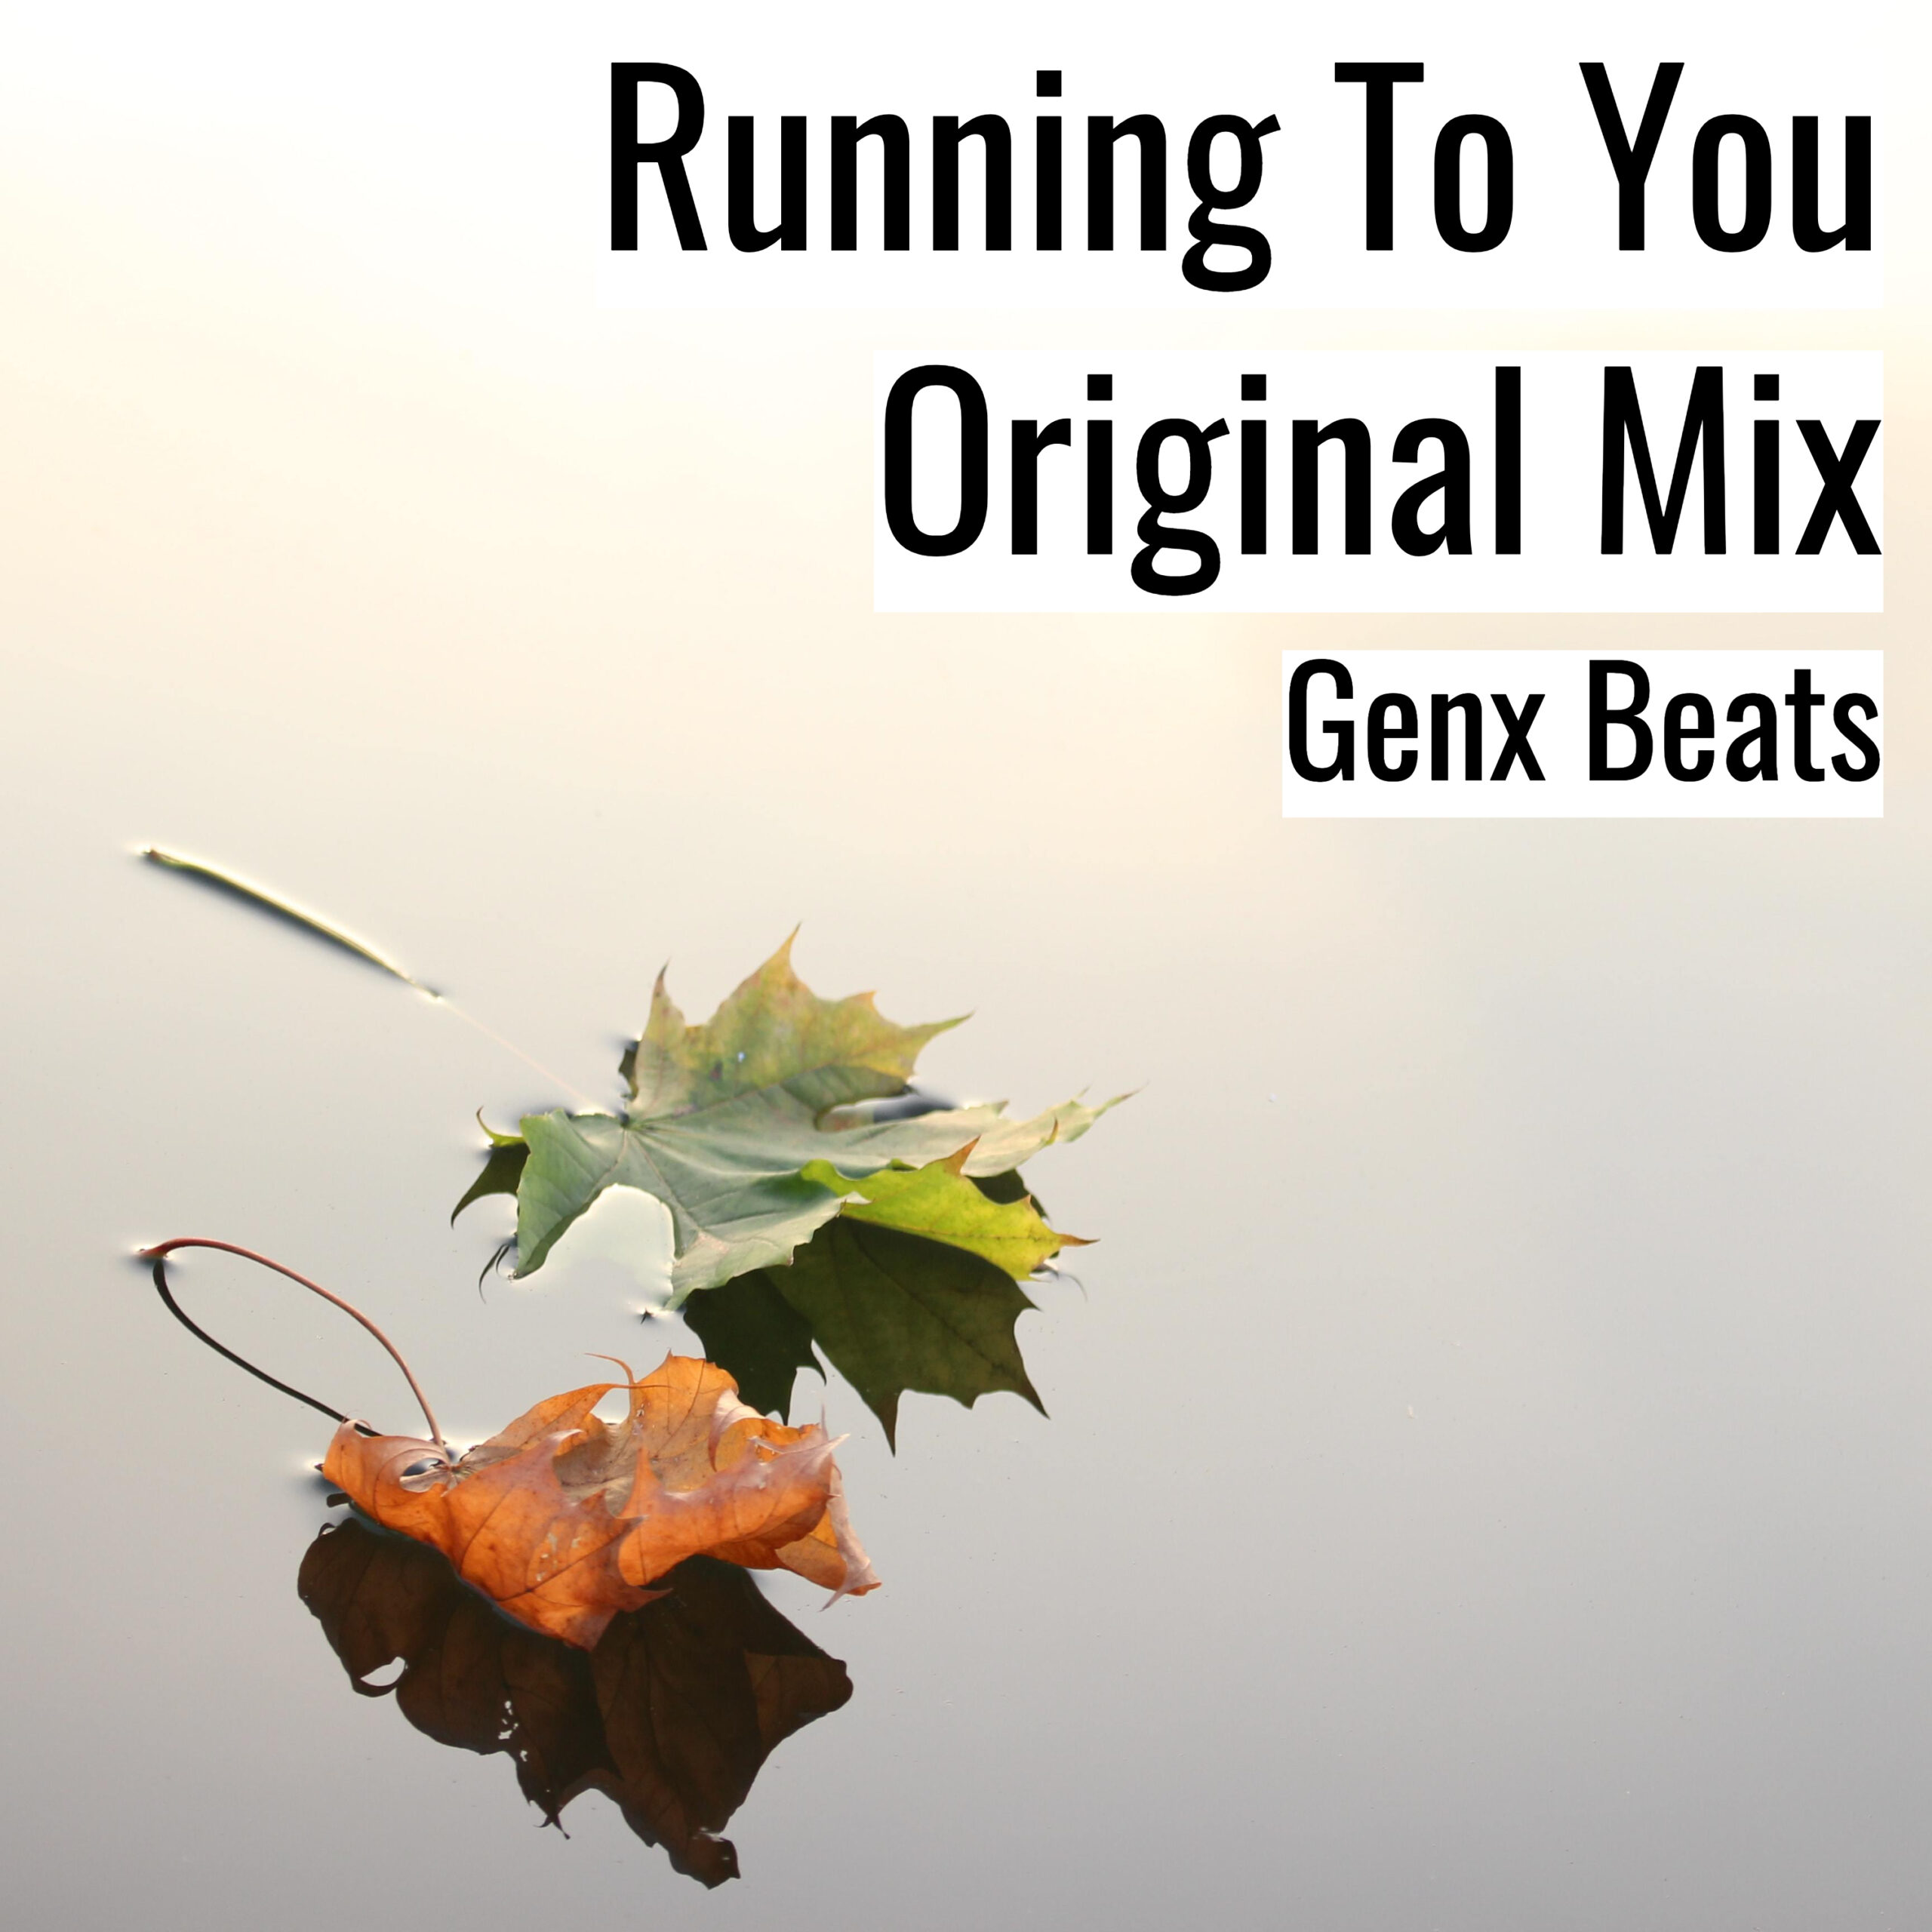 Running To You Original Mix scaled